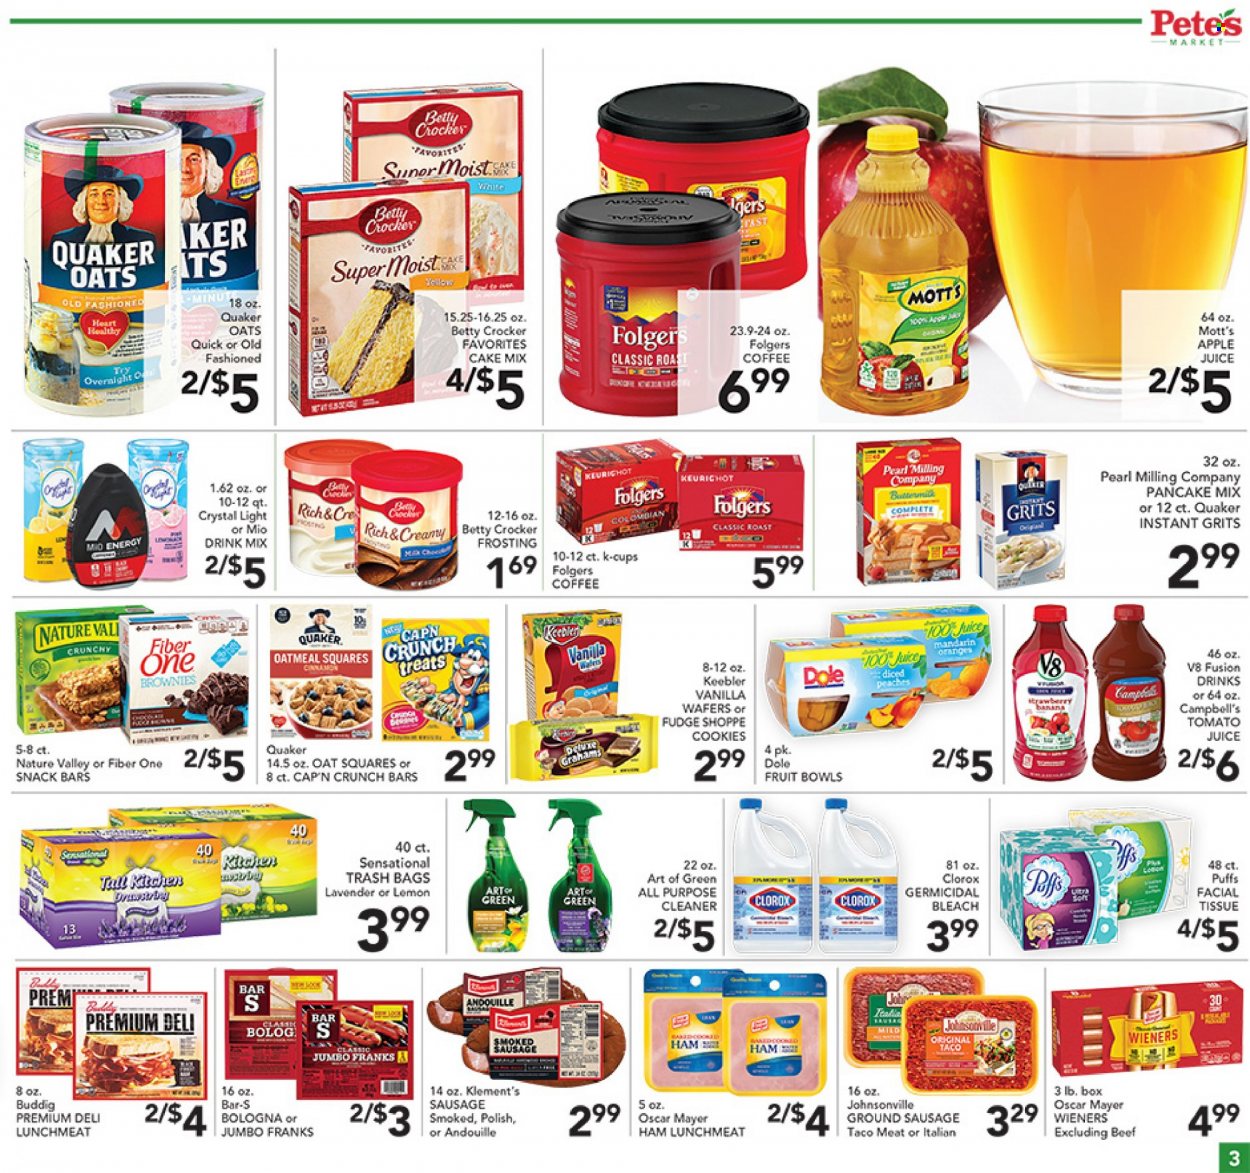 thumbnail - Pete's Fresh Market Flyer - 09/15/2021 - 09/21/2021 - Sales products - puffs, brownies, cake mix, Dole, mandarines, Mott's, Campbell's, pancakes, Quaker, ham, Johnsonville, Oscar Mayer, sausage, smoked sausage, lunch meat, cookies, fudge, wafers, snack, snack bar, Keebler, frosting, oatmeal, grits, Cap'n Crunch, Nature Valley, Fiber One, cinnamon, apple juice, tomato juice, juice, coffee, Folgers, coffee capsules, K-Cups. Page 3.